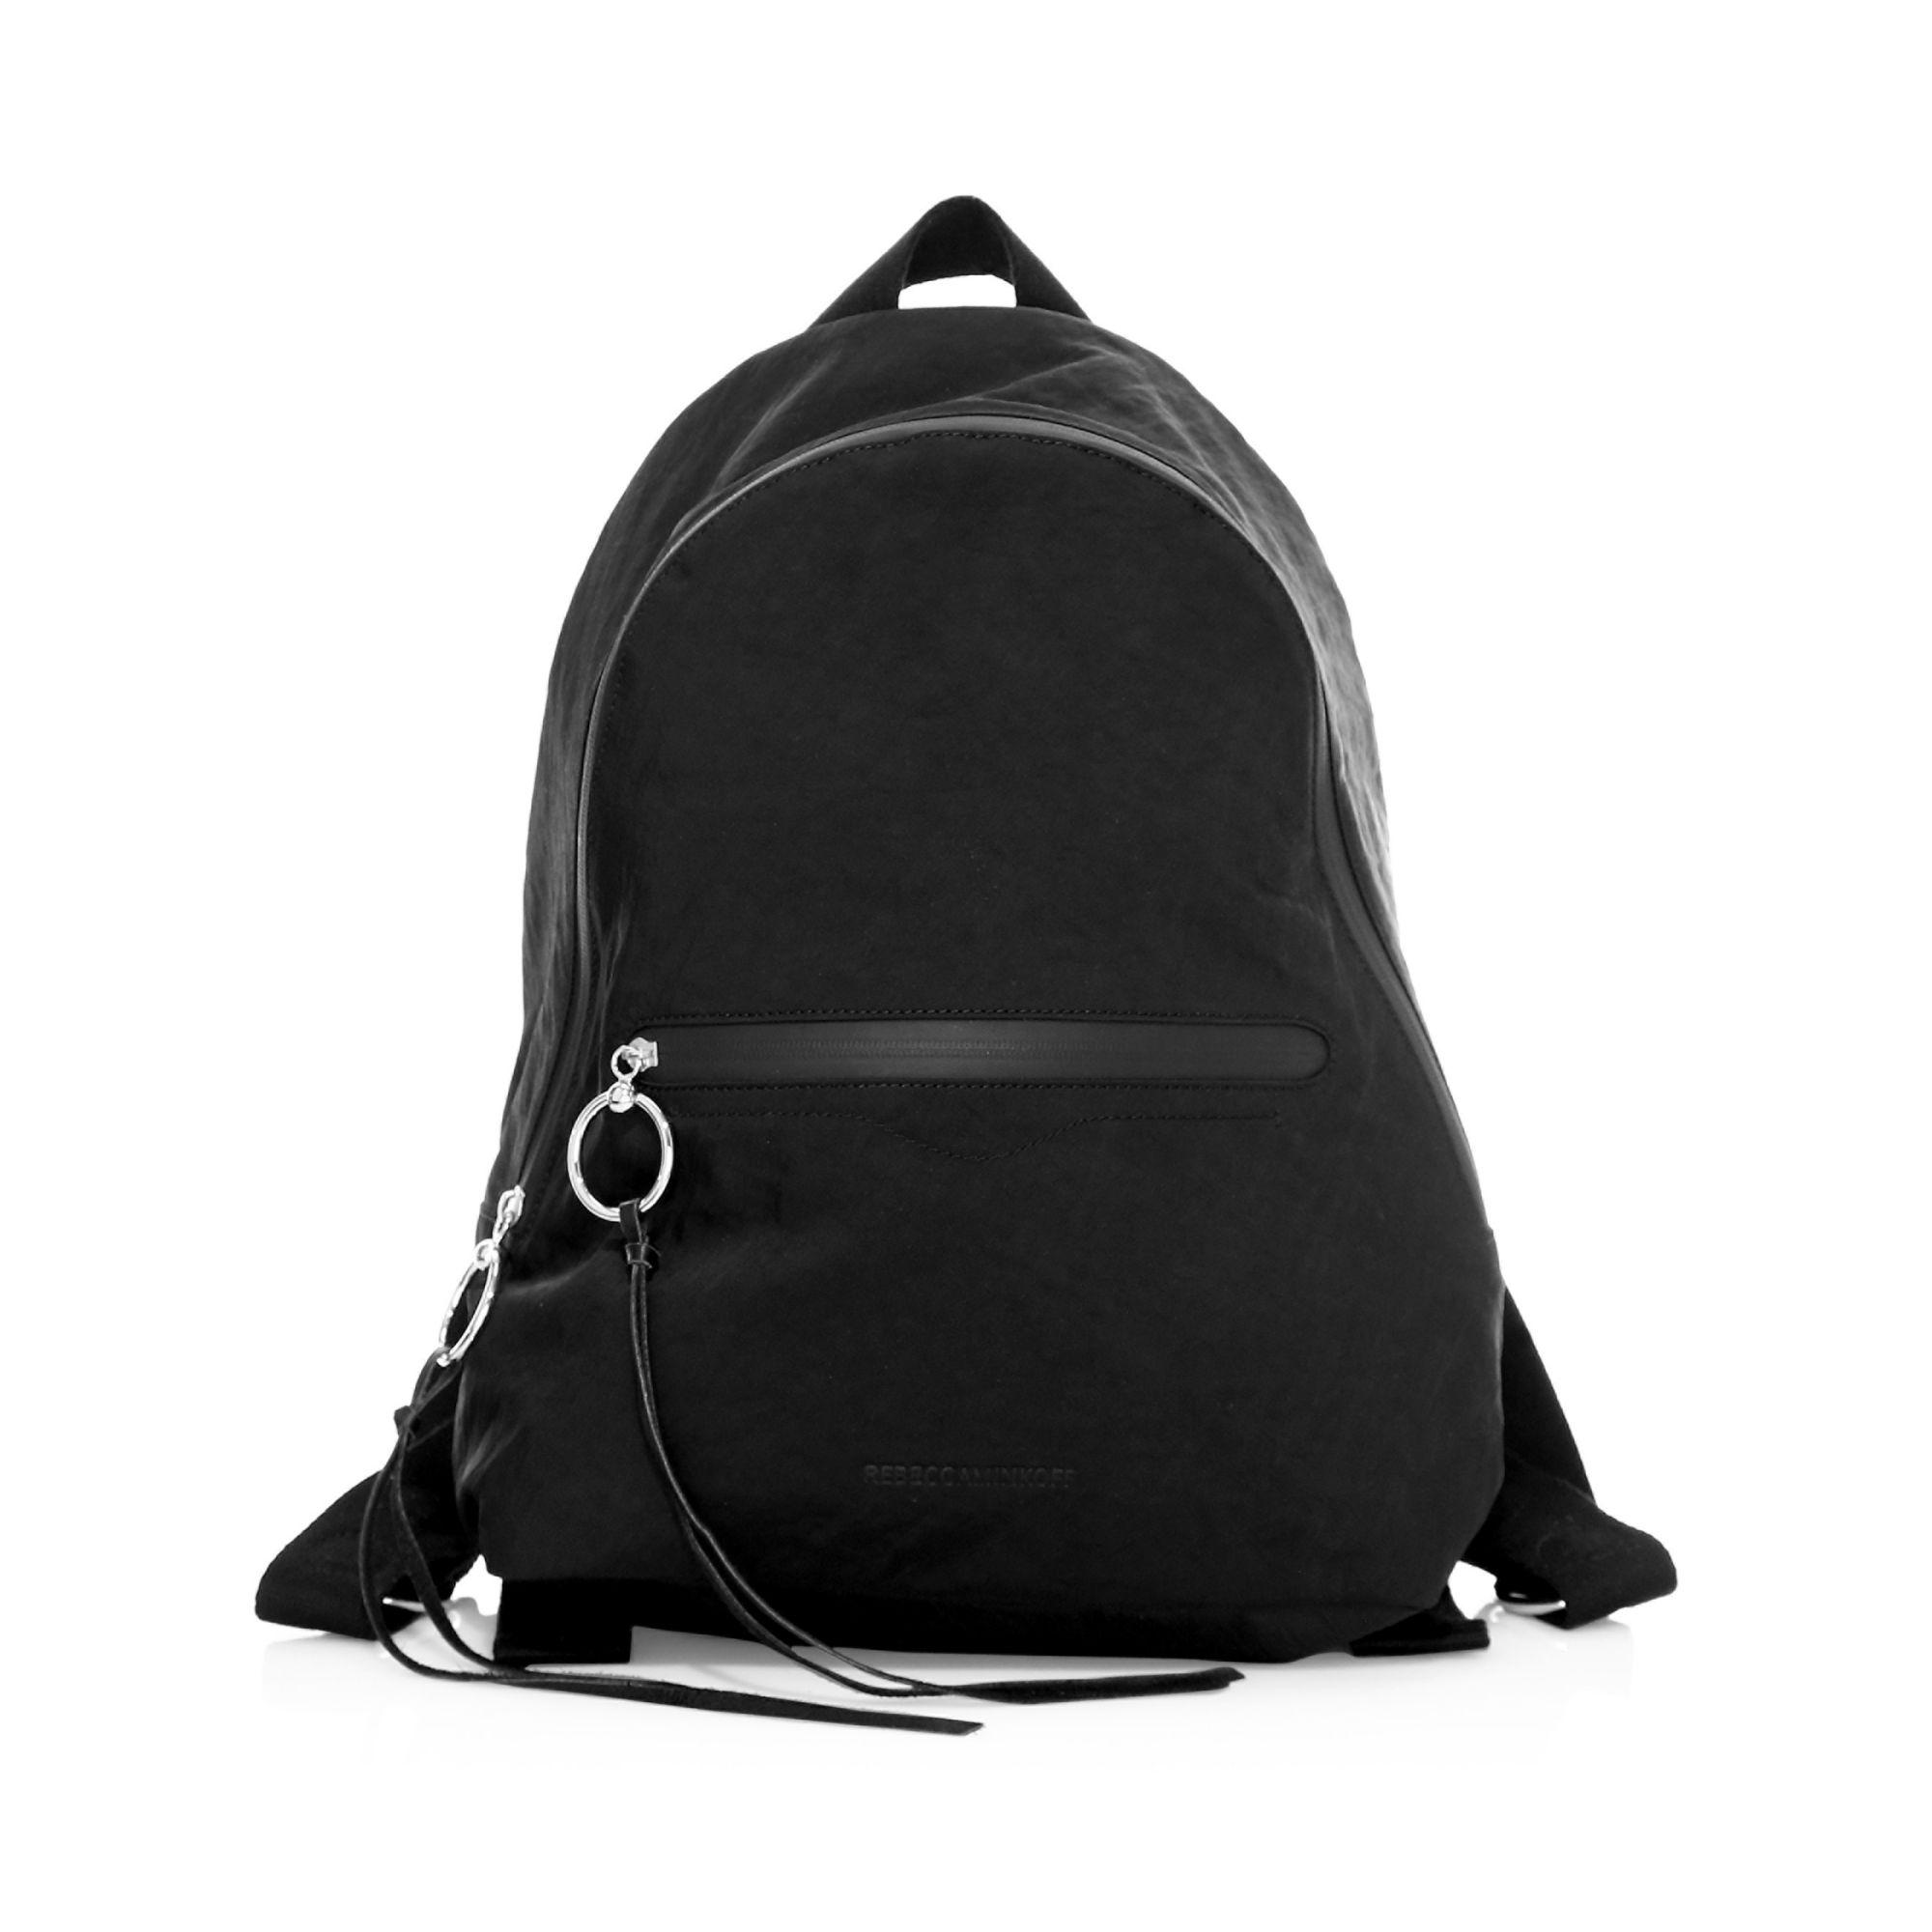 Rebecca Minkoff Synthetic Dome Nylon Backpack in Black - Lyst